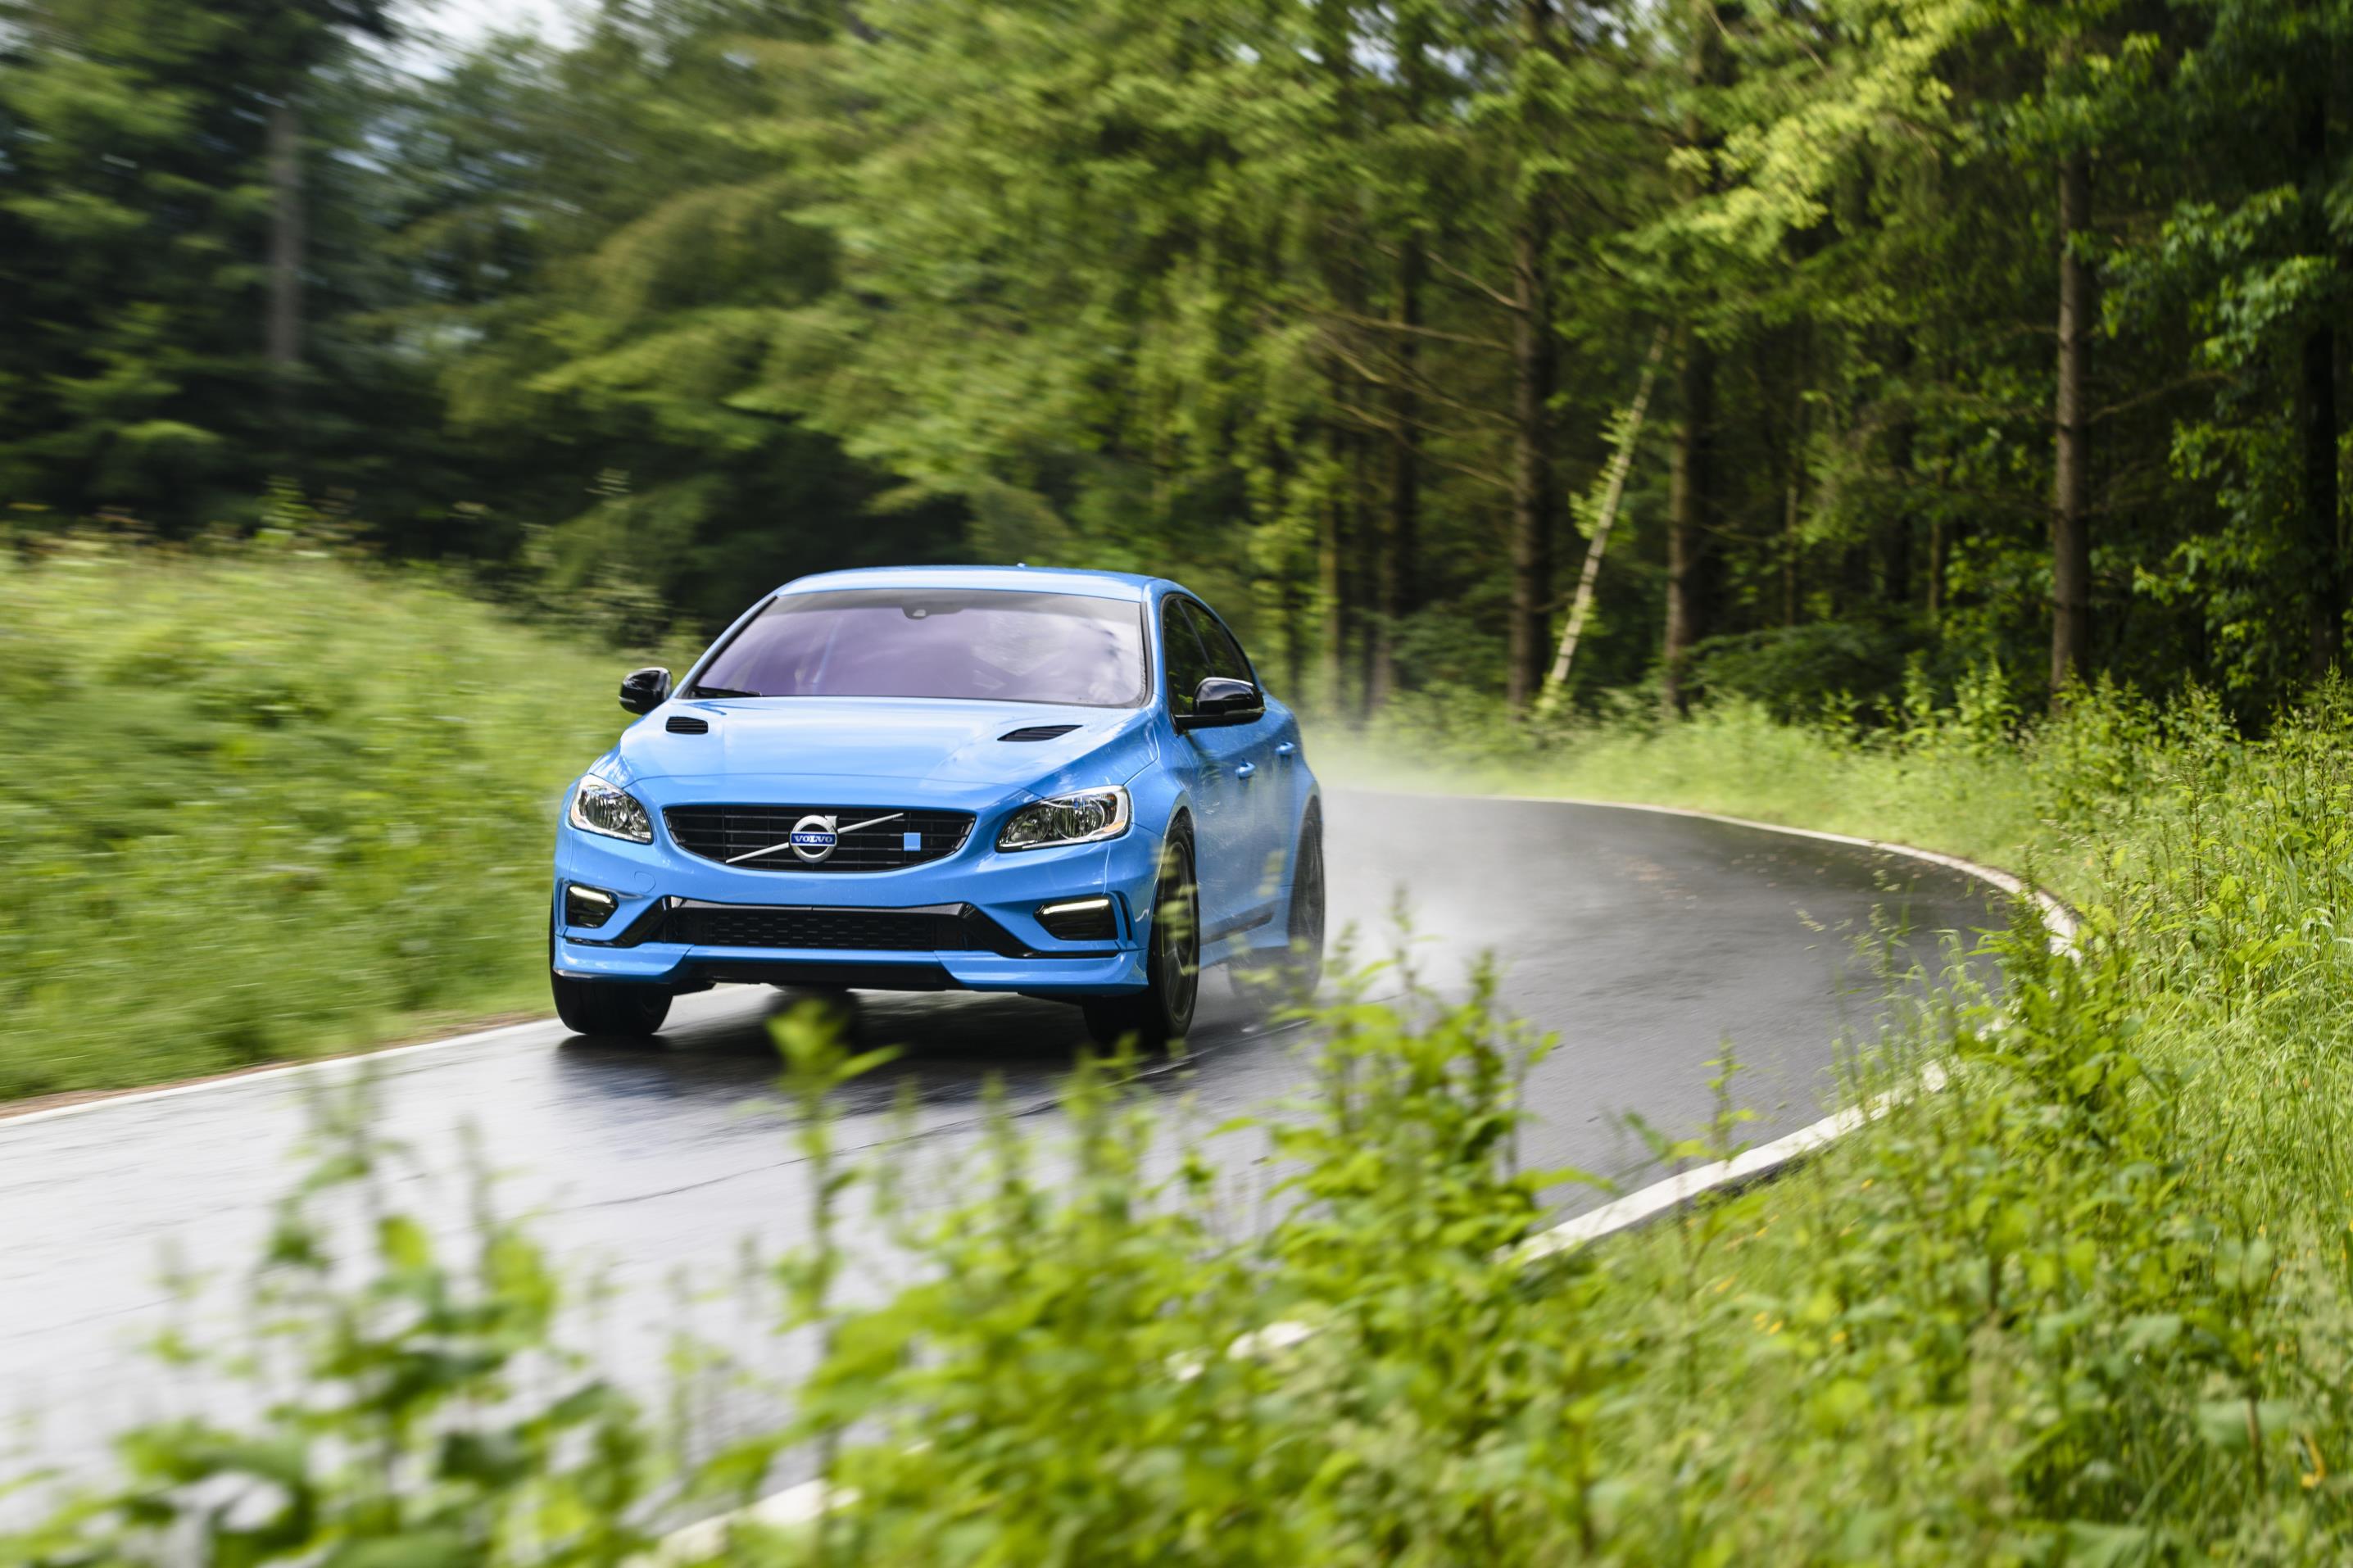 Technology advancements will take Polestar to pole position for Volvo